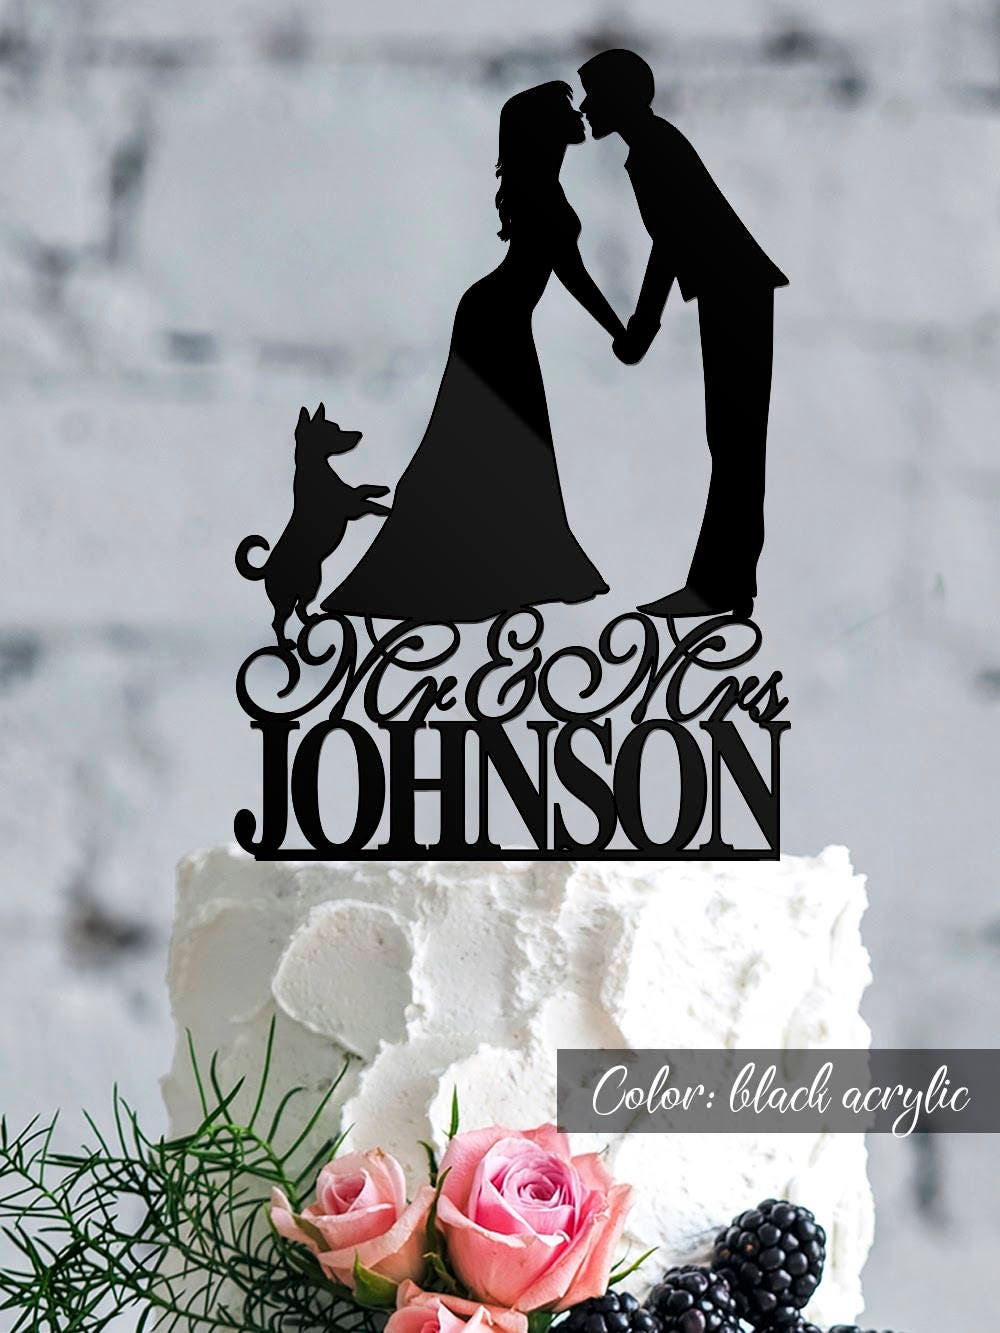 Romantic Cake Topper with Dog Acrylic Silhouette Cake Topper Cake Decoration 